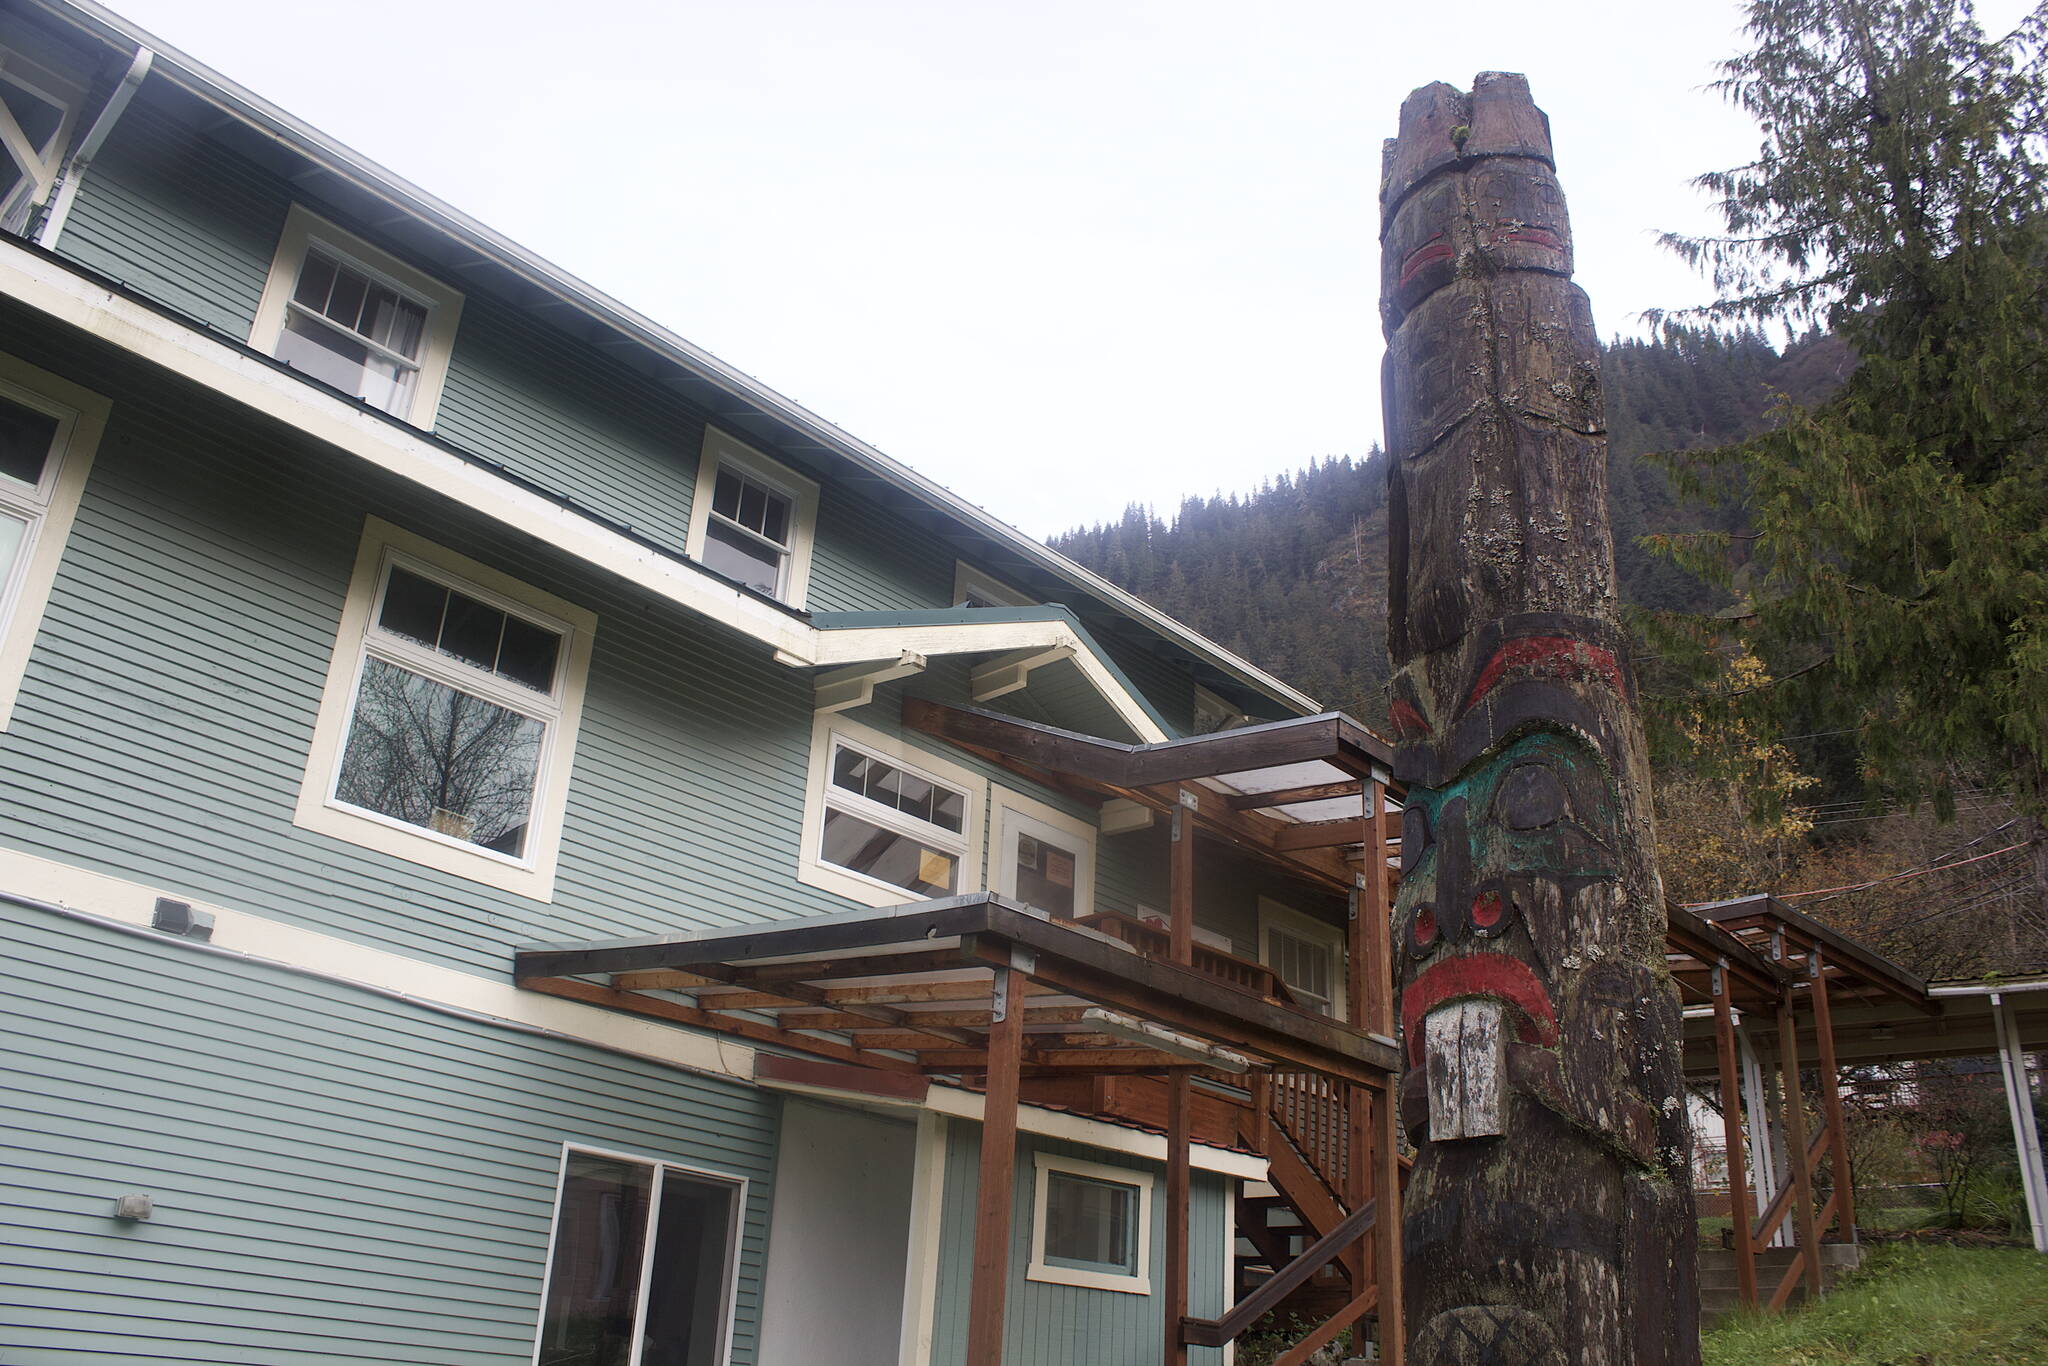 Mark Sabbatini / Juneau Empire 
A totem pole stands outside Hospice and Home Care of Juneau, which is shutting down Wednesday after providing services for about 20 years due to lack of staff. The closure will affect 17 home health and two hospice patients, with program and city officials in discussions with Bartlett Regional Hospital and SEARHC about taking over services for such patients.